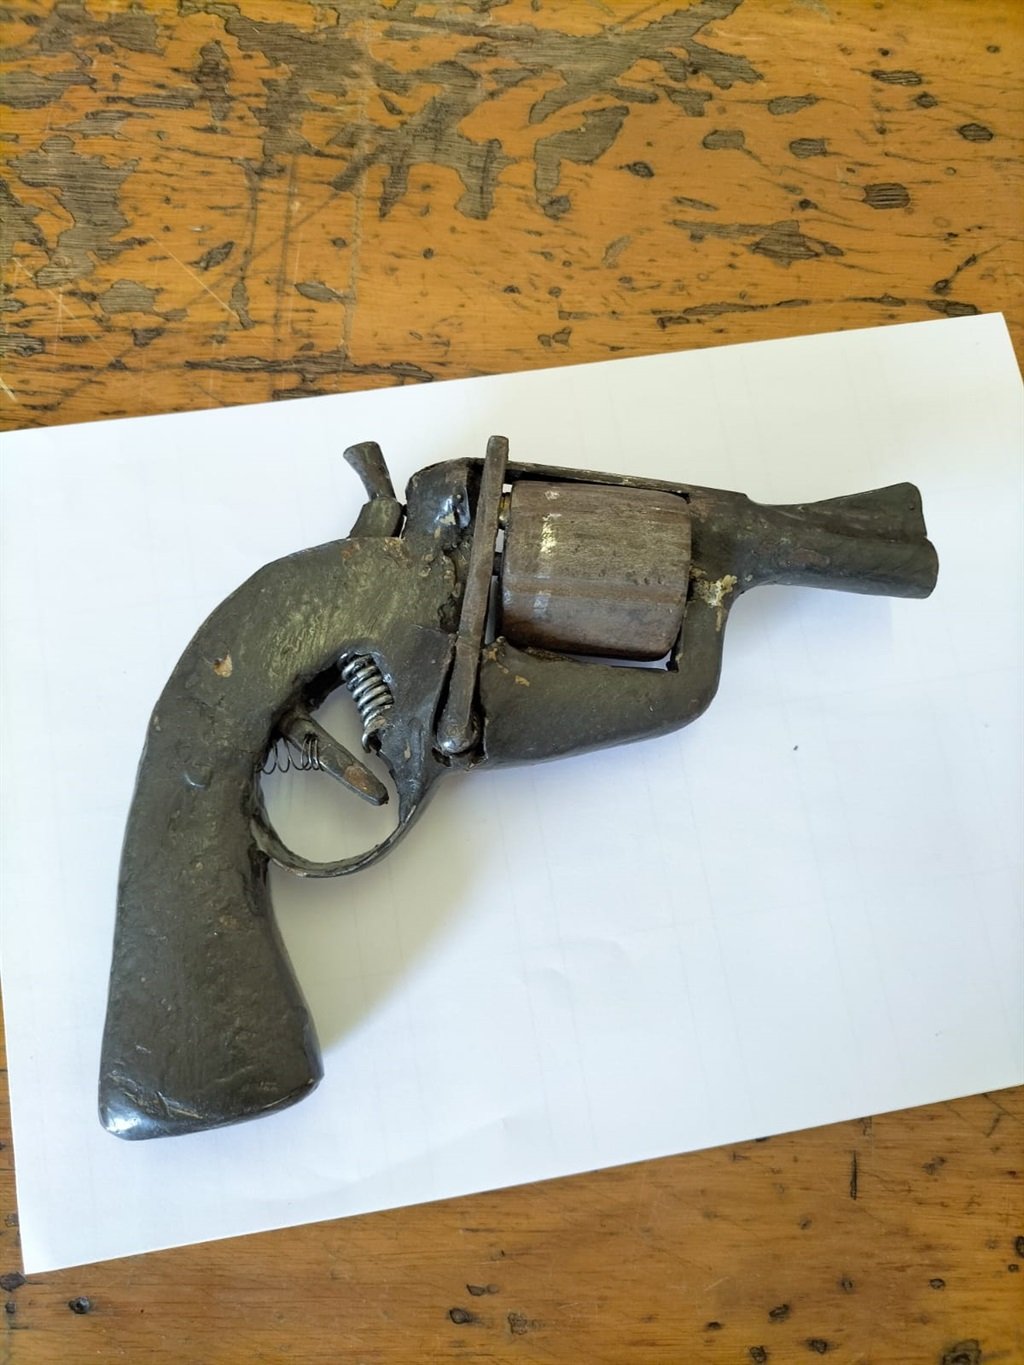 The suspect used to terrorise residents with this gun.